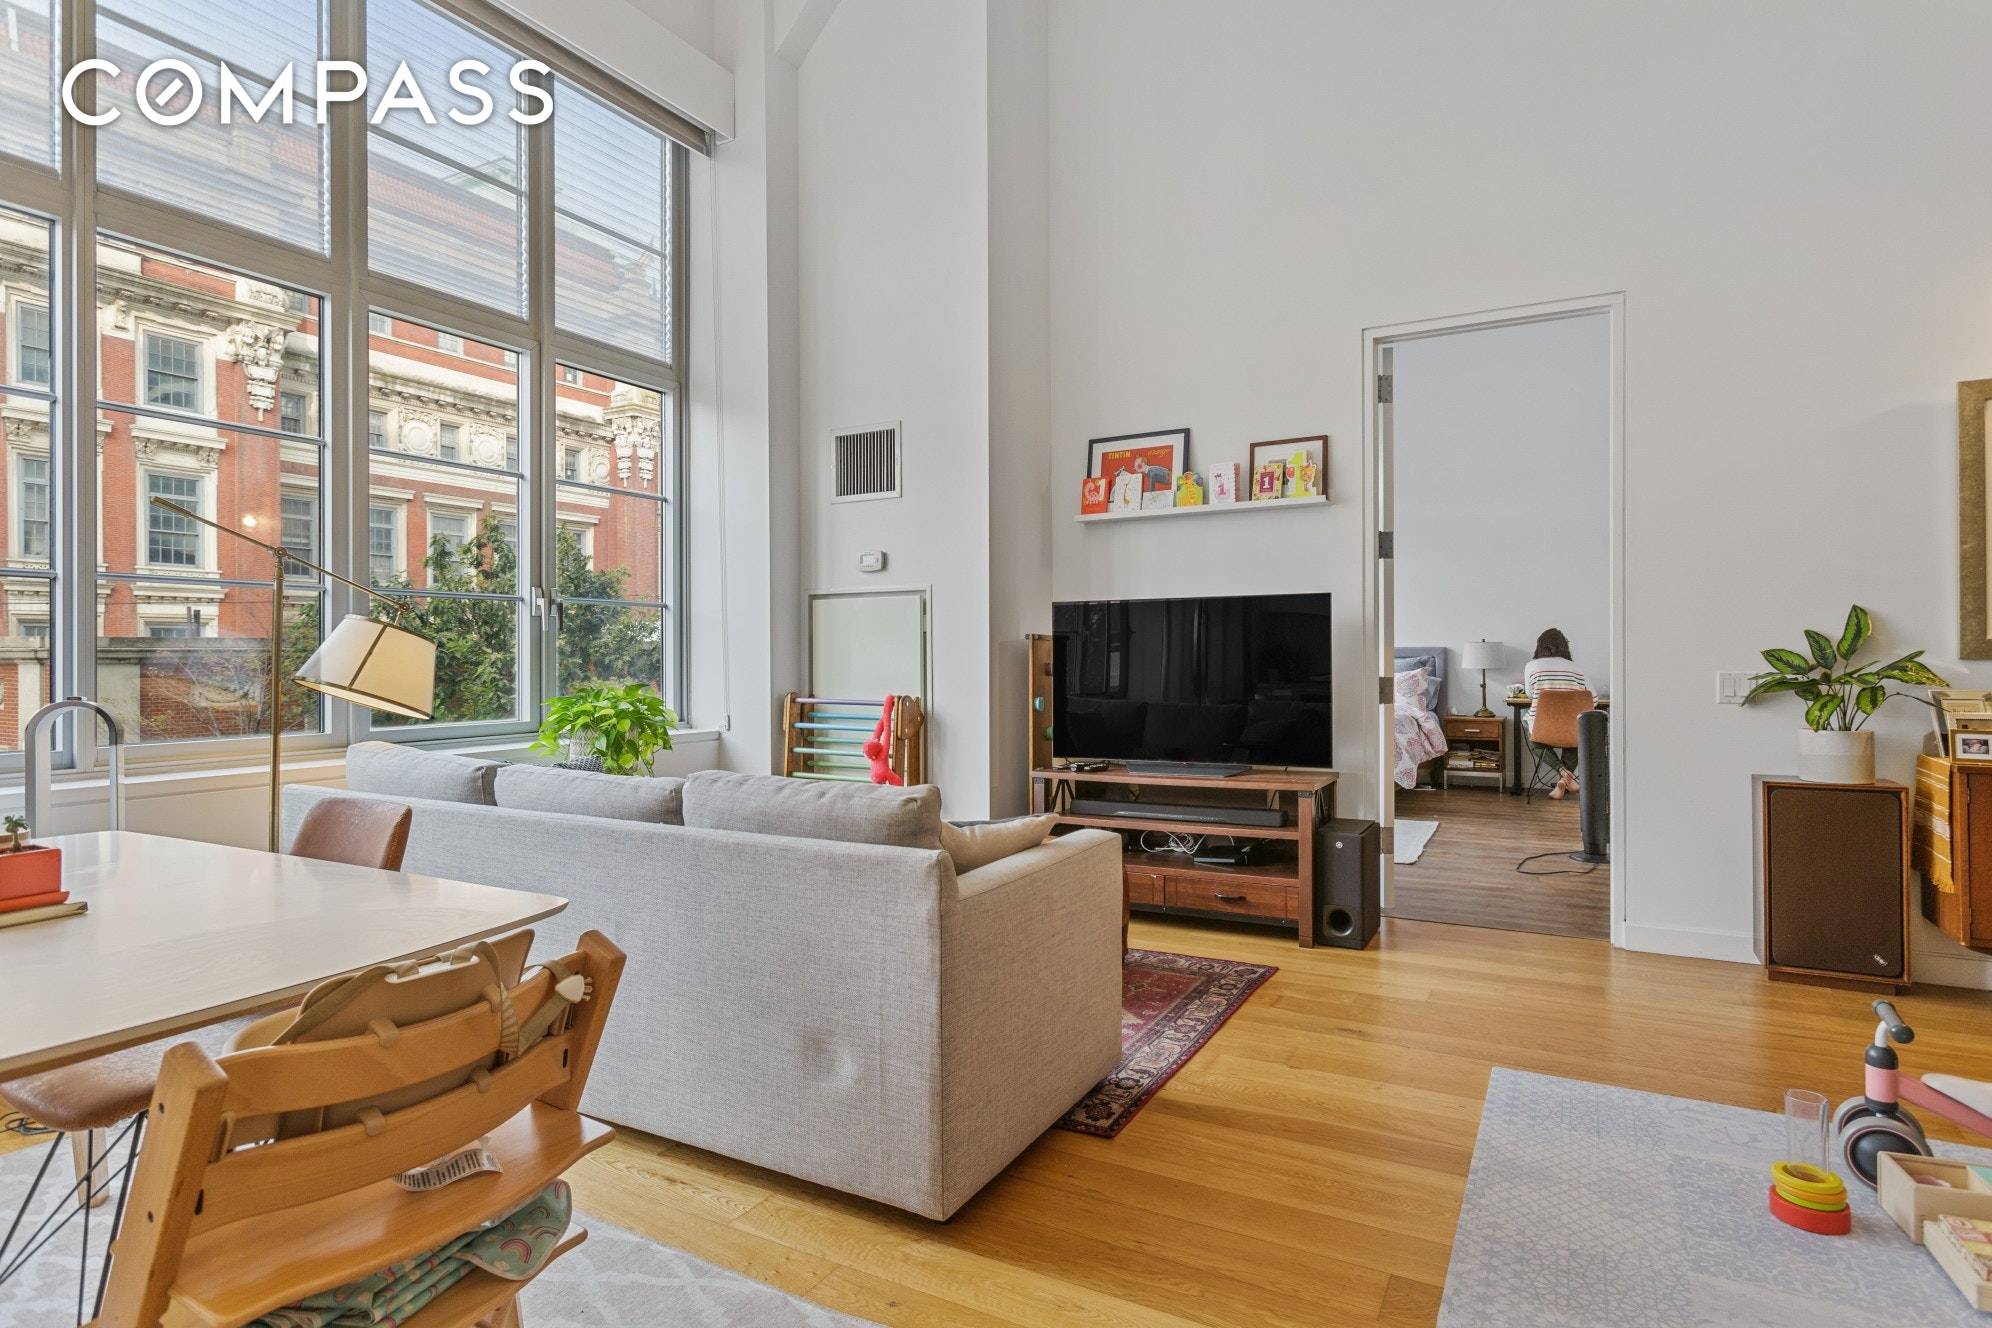 Very bright 1 bedroom 2 bathroom home office flexible 2 bedroom loft, located in the most desirable Arris Lofts in Long Island City, facing west and the beautiful 1886 landmarked ...